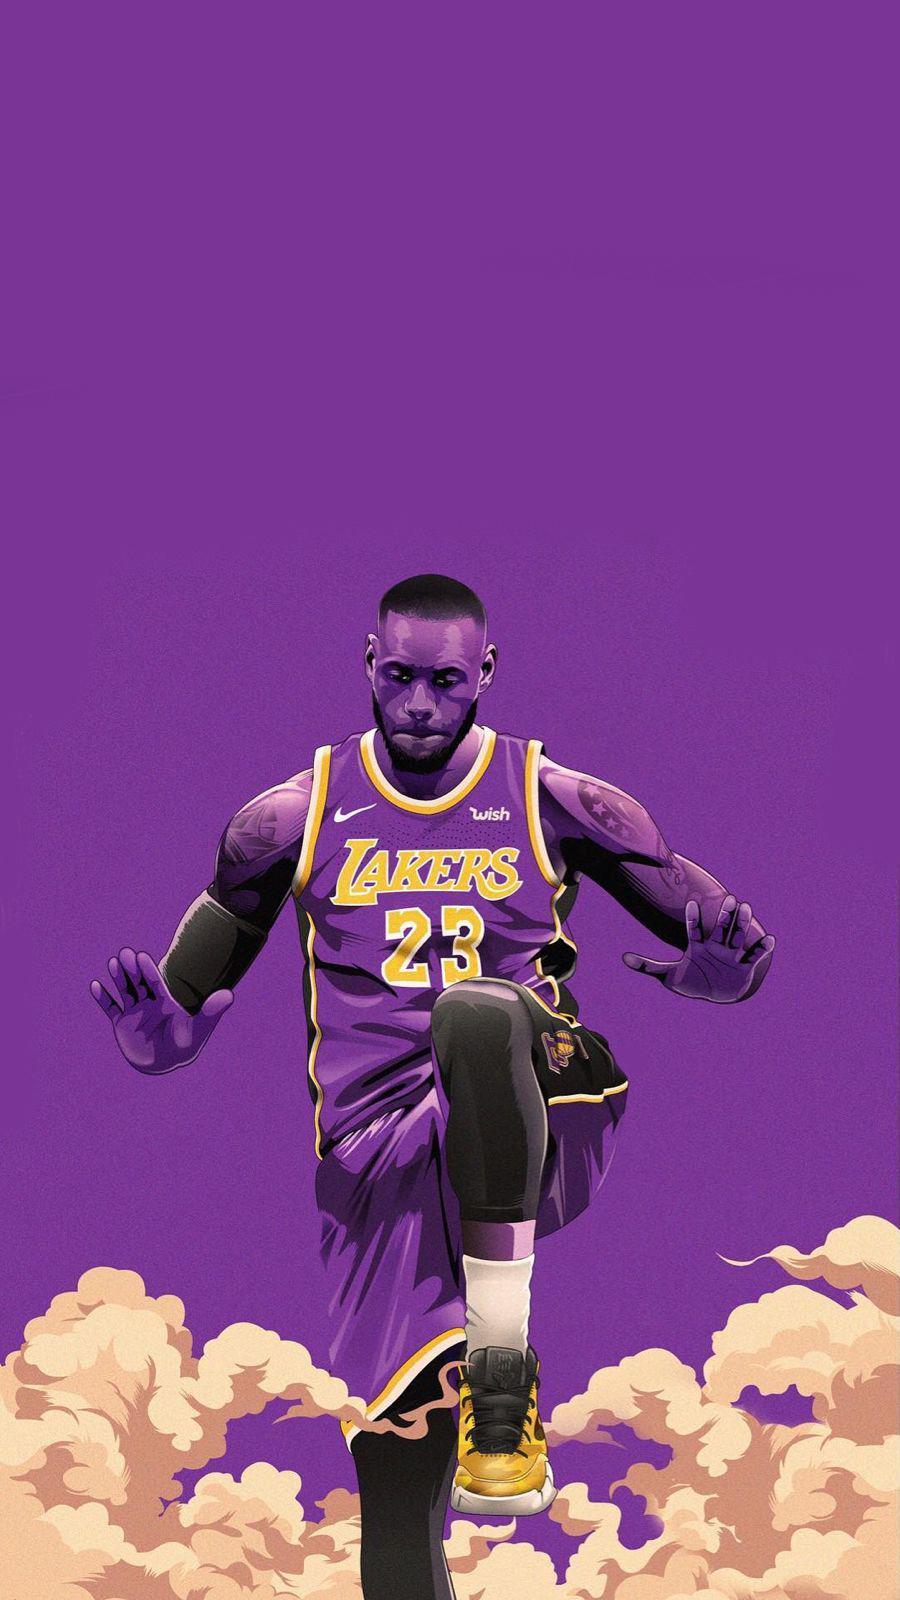 Lakers Wallpaper Browse Lakers Wallpaper with collections of Angeles  Jersey Kobe Lakers Lebron htt  Lakers wallpaper Nba wallpapers Los  angeles lakers logo